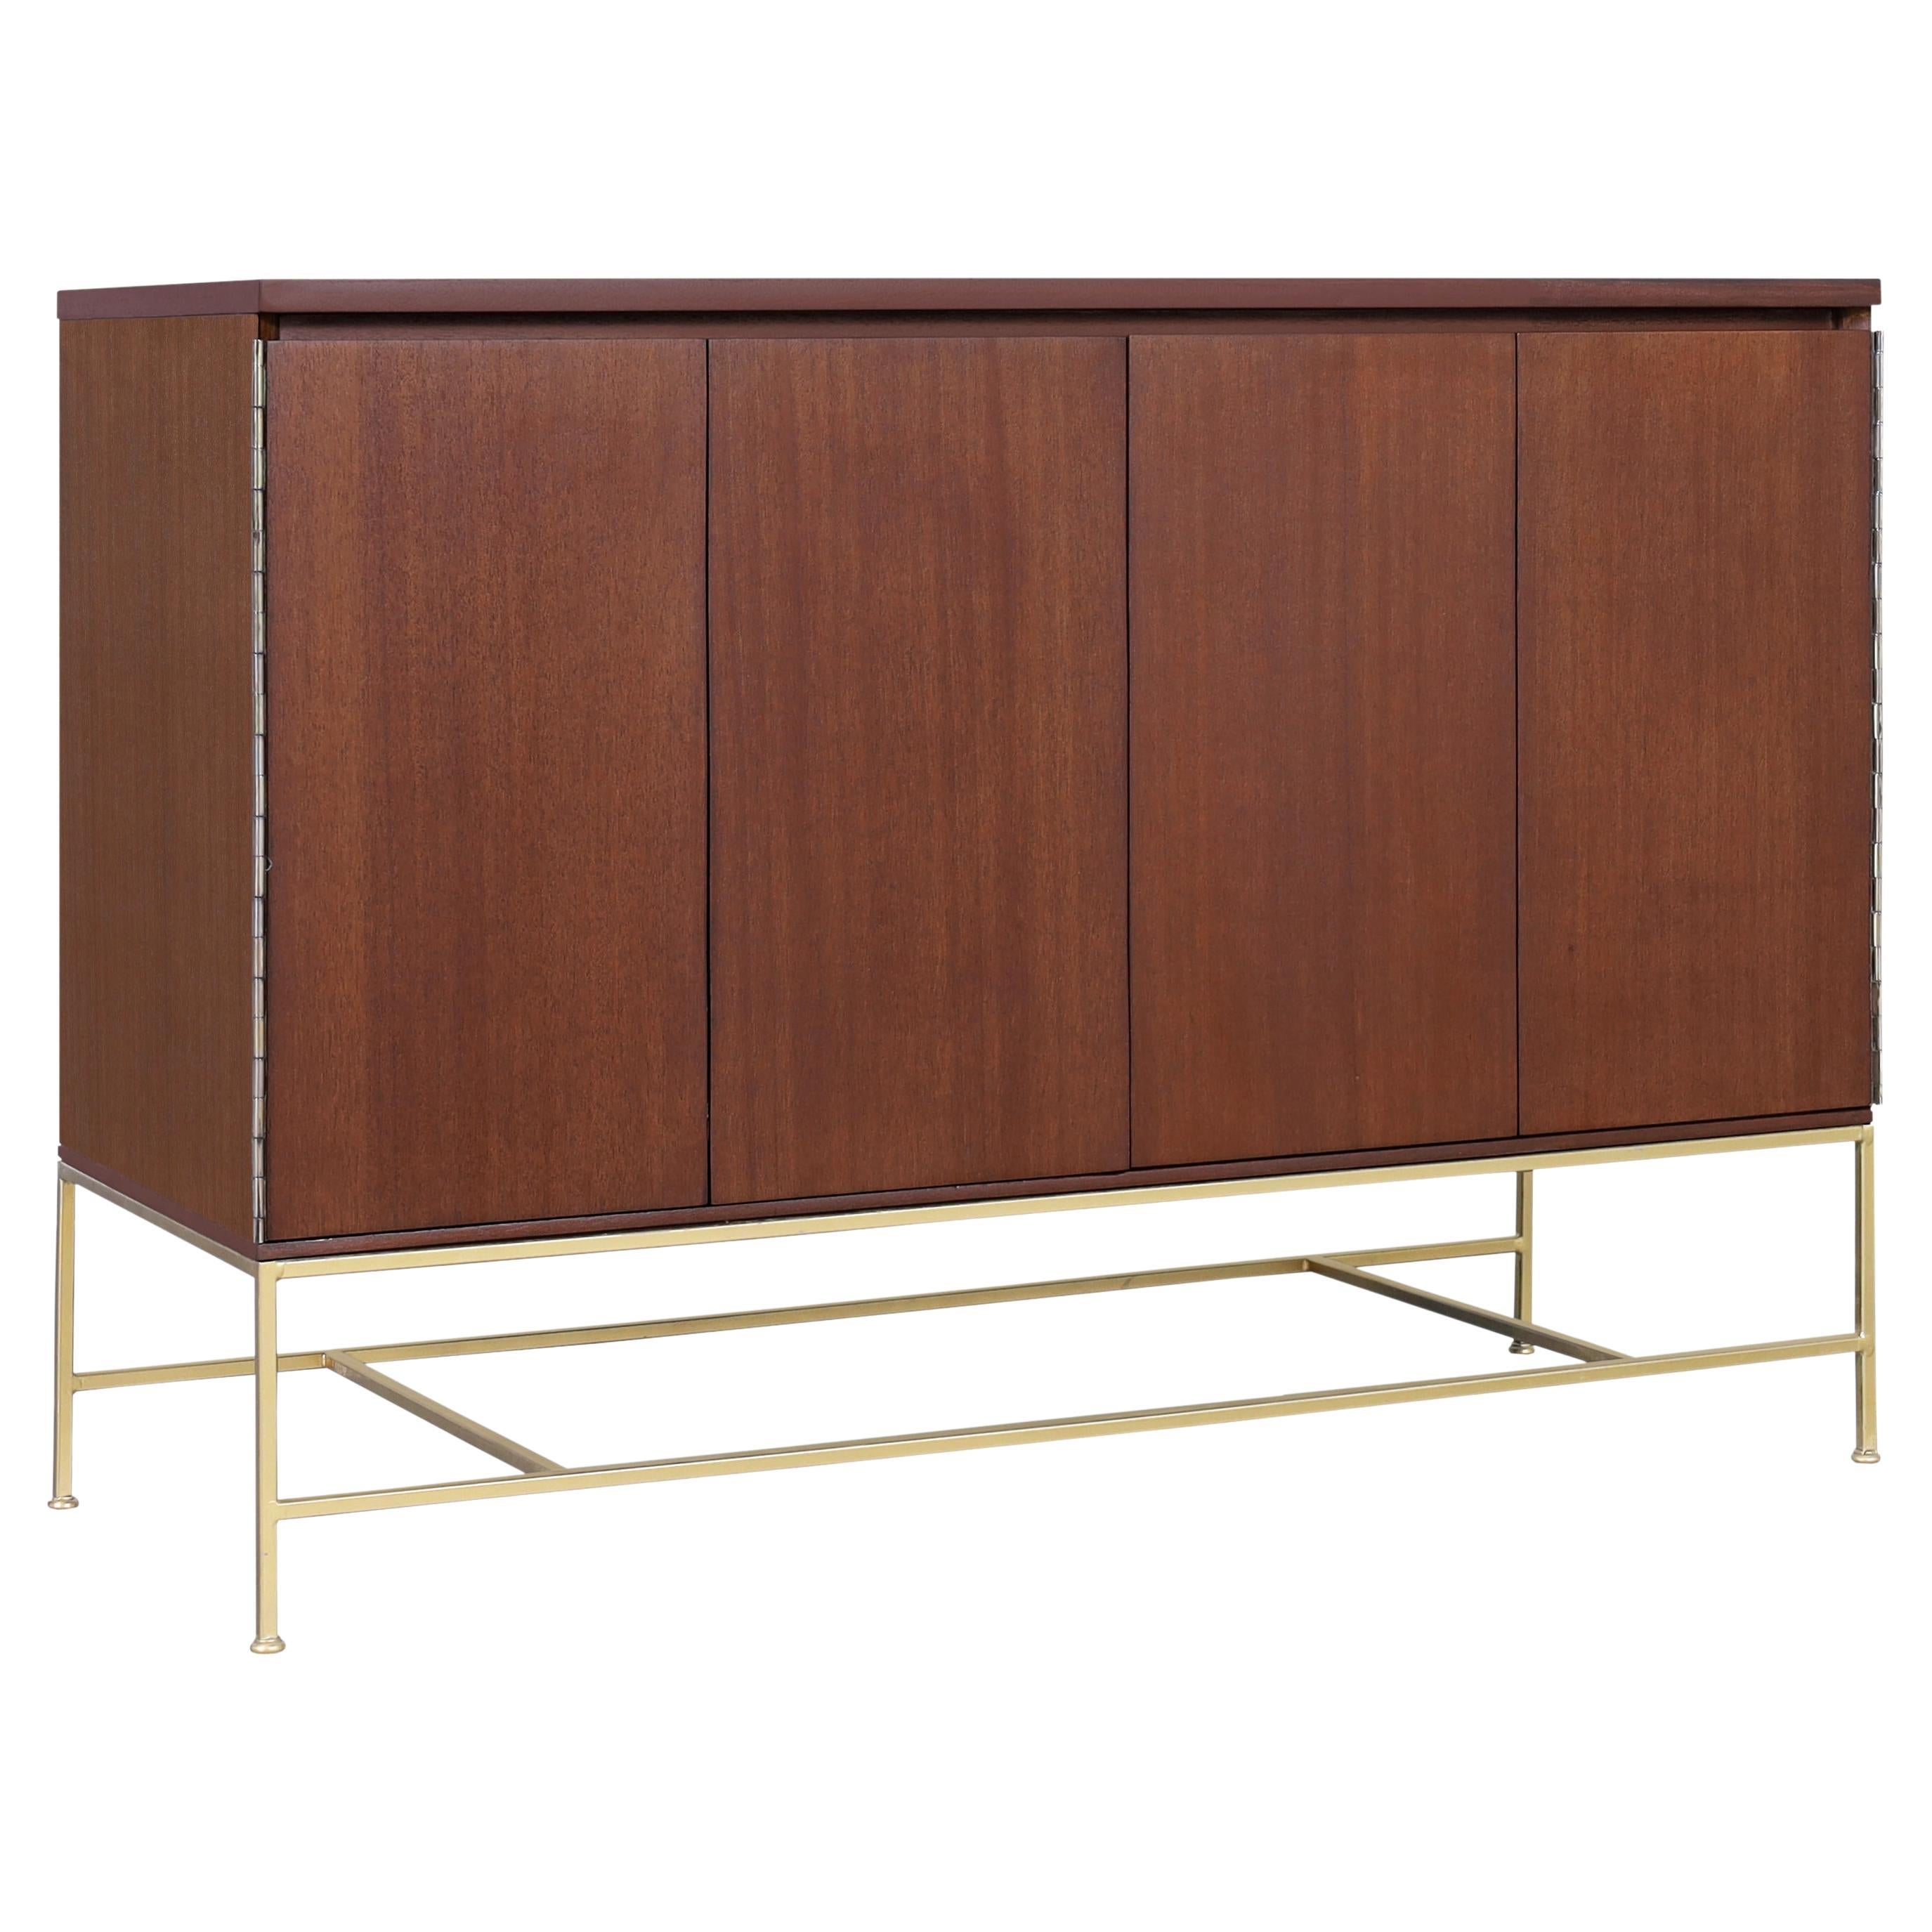 Vintage "Irwin Collection" Mahogany and Brass Credenza by Paul McCobb